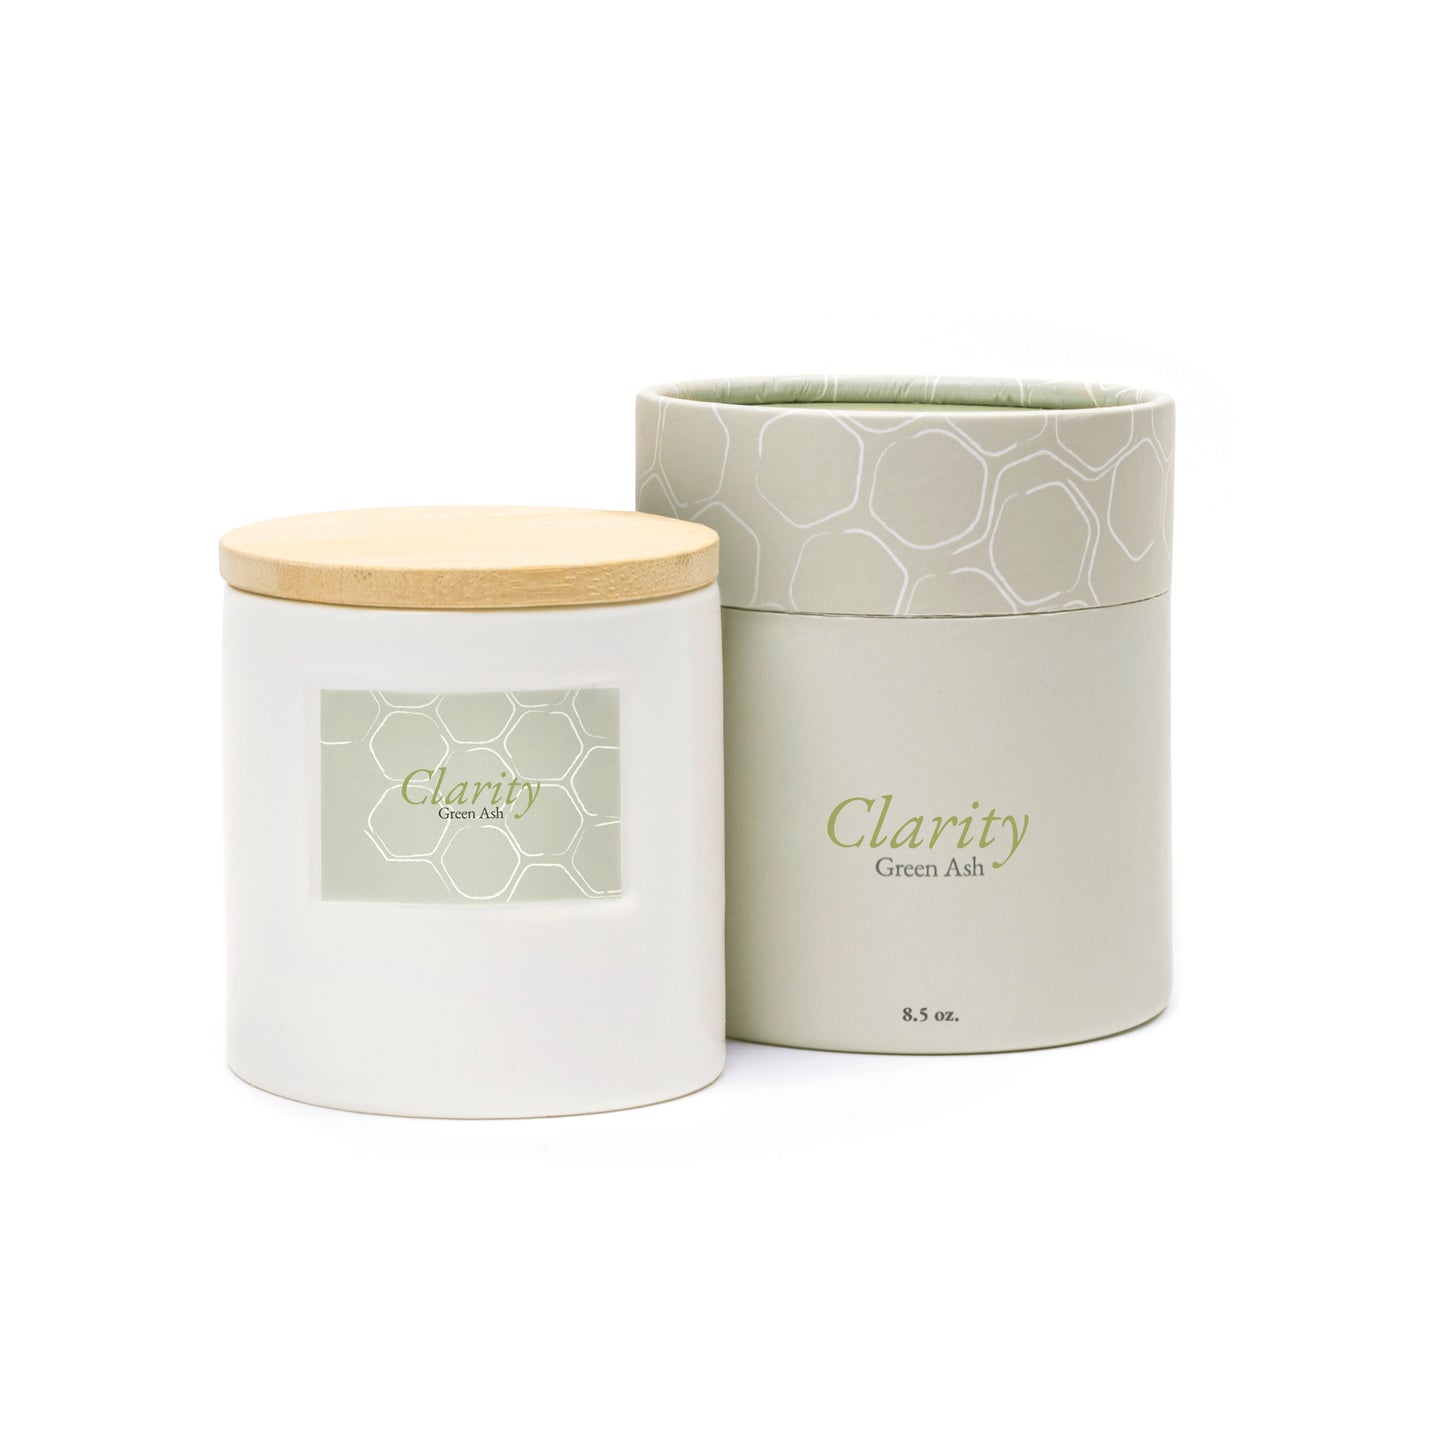 CLARITY Green Ash Candle 8.5oz